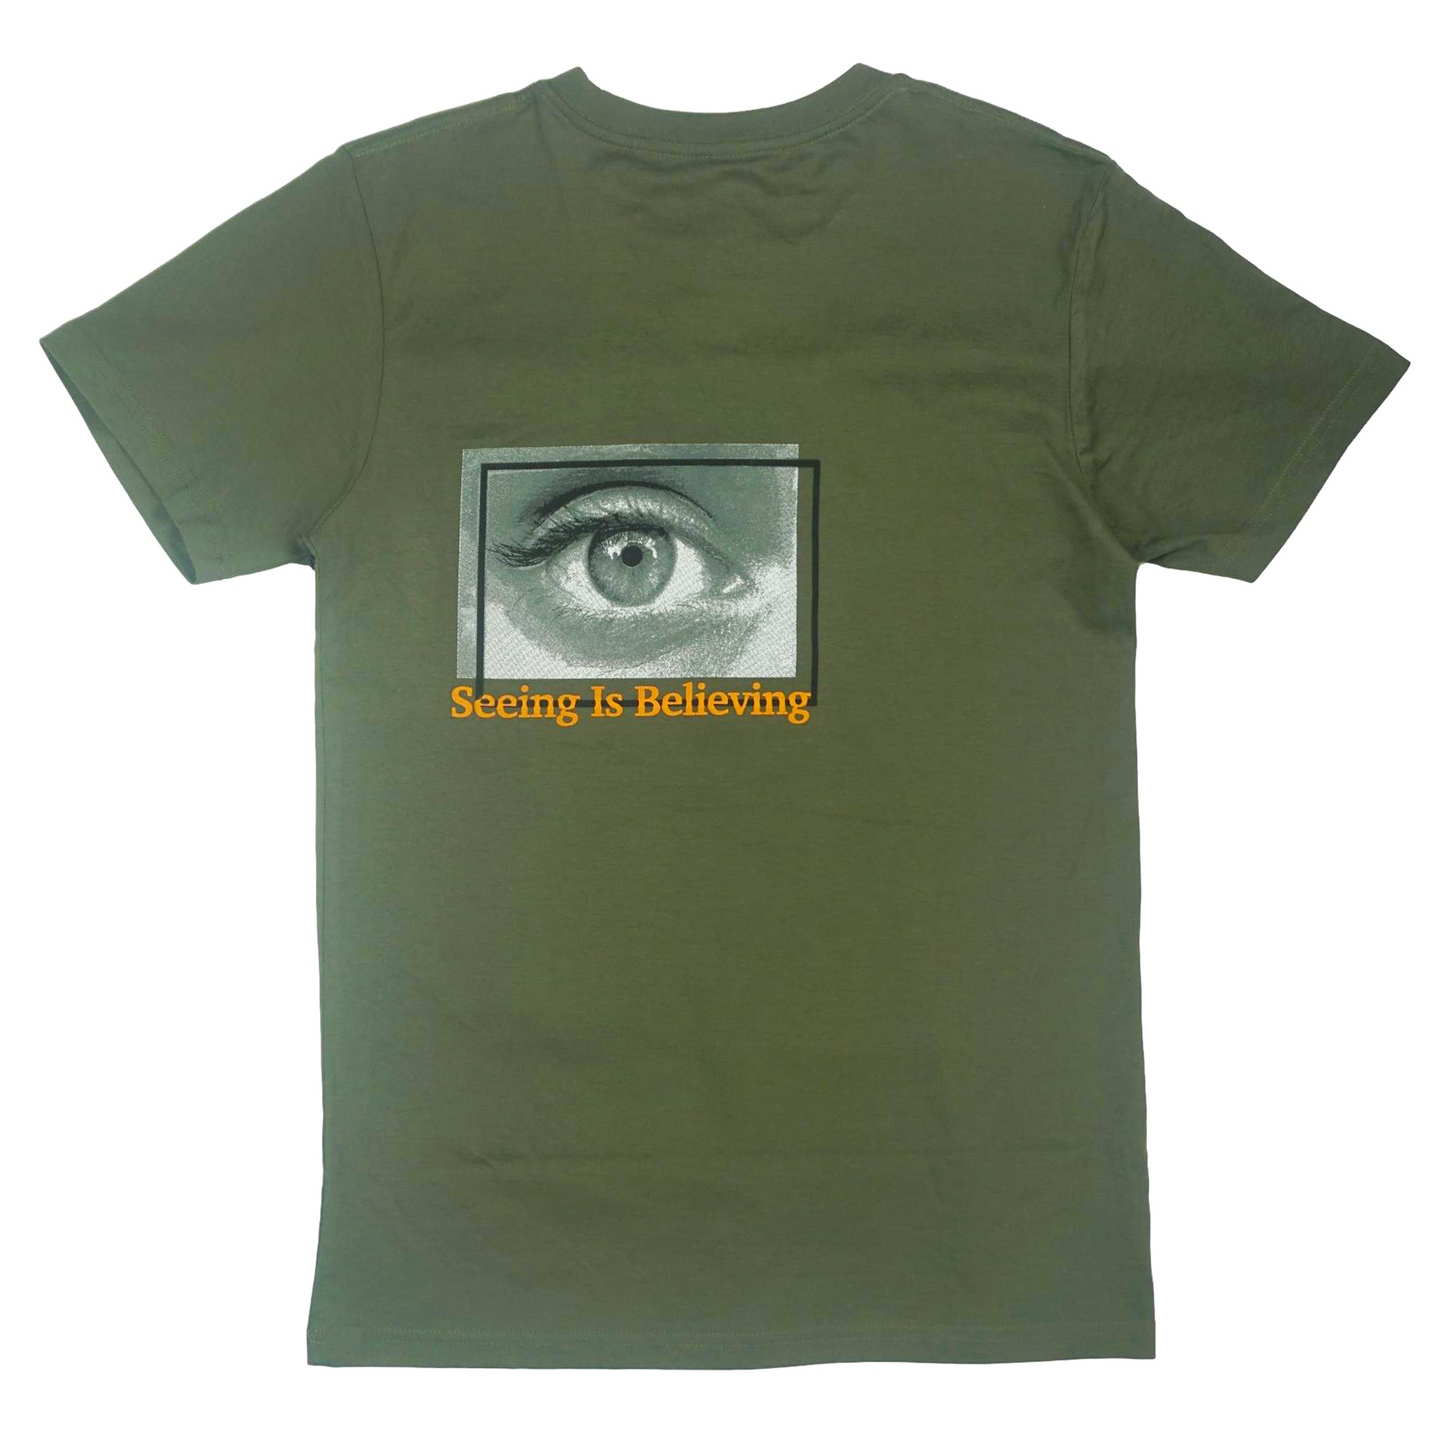 Today Is Tee (Olive/Org) /D14